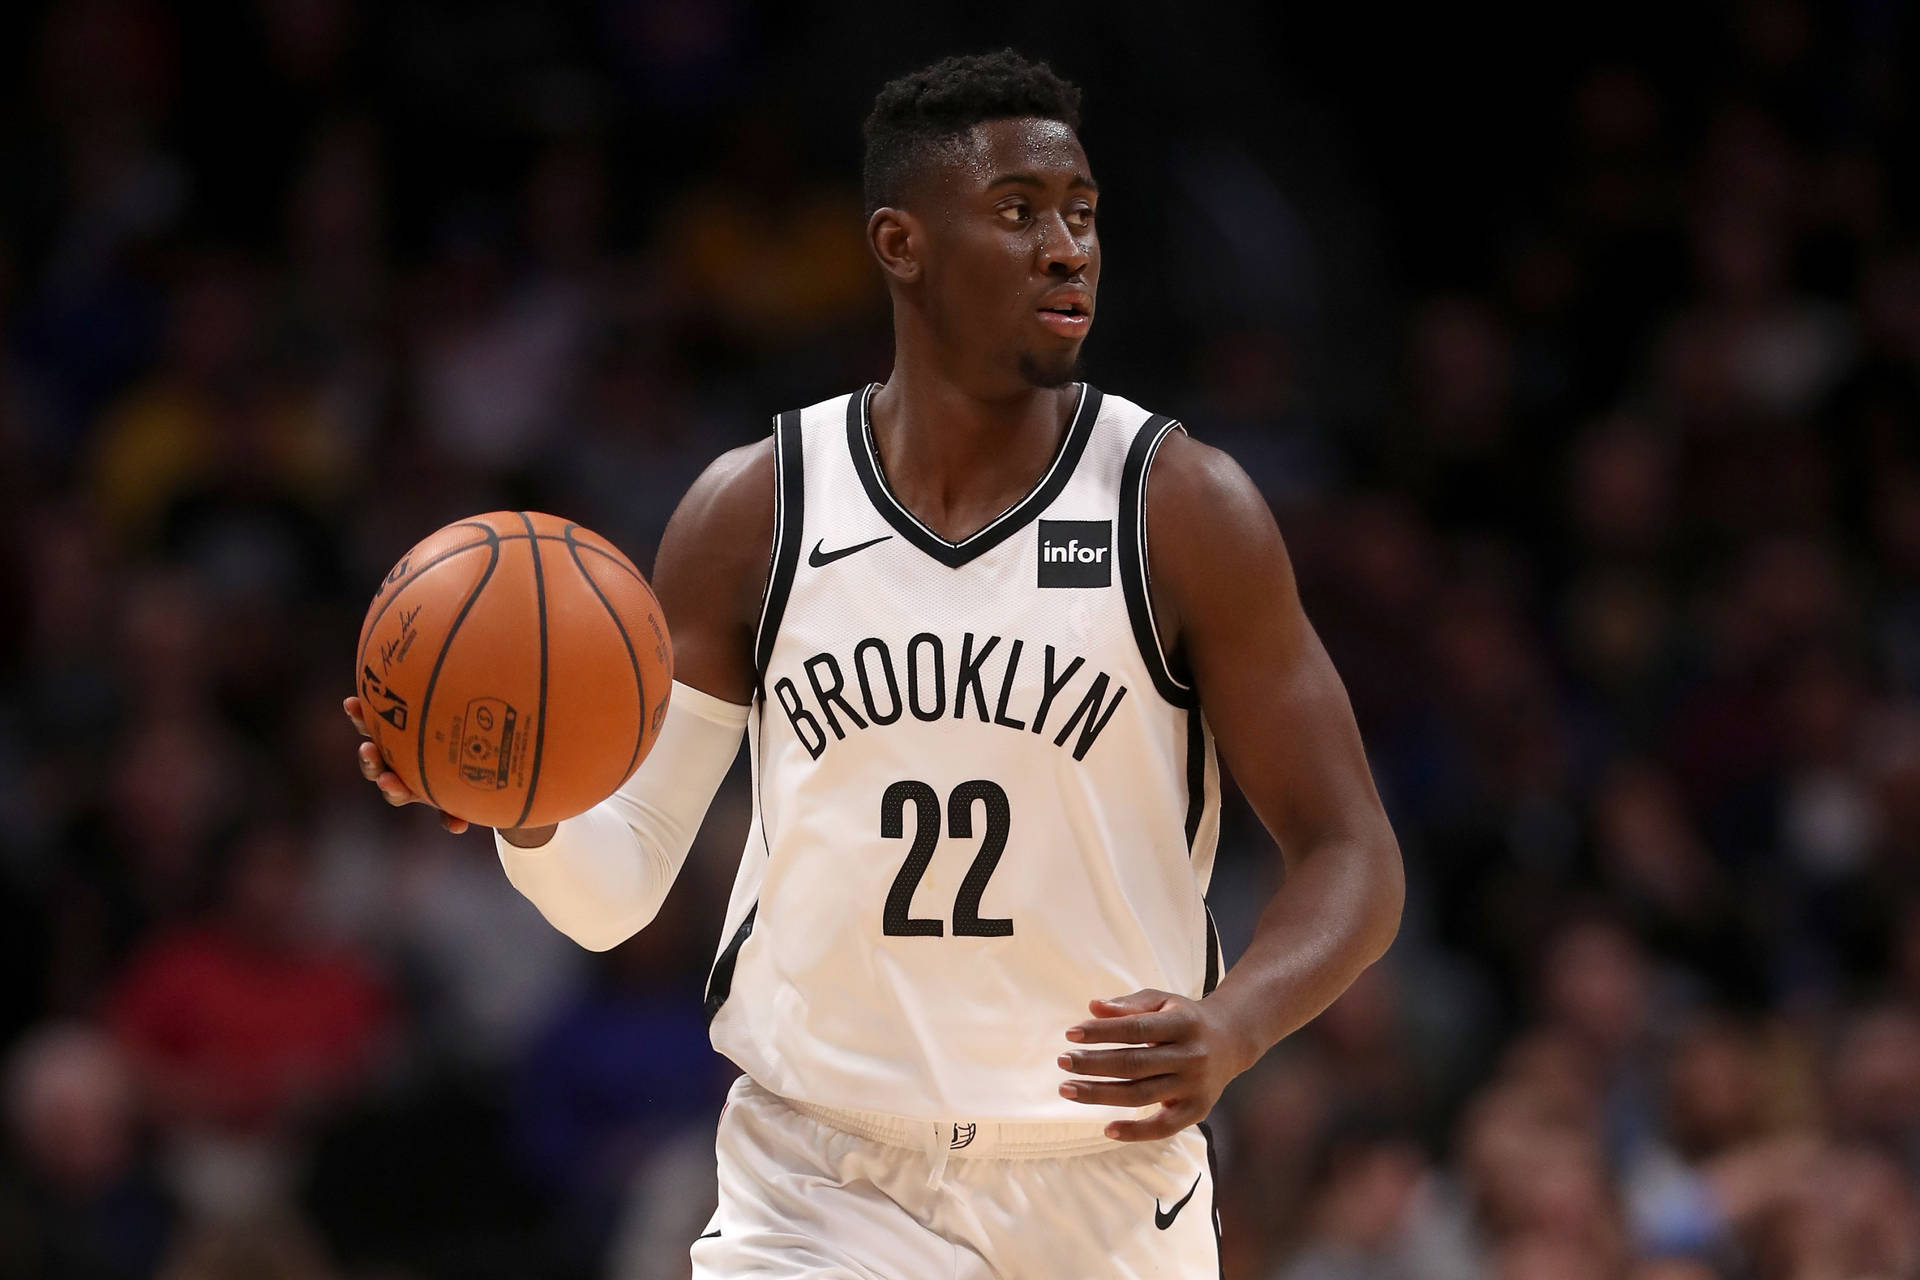 Dribbling Caris Levert Focus Photography Background